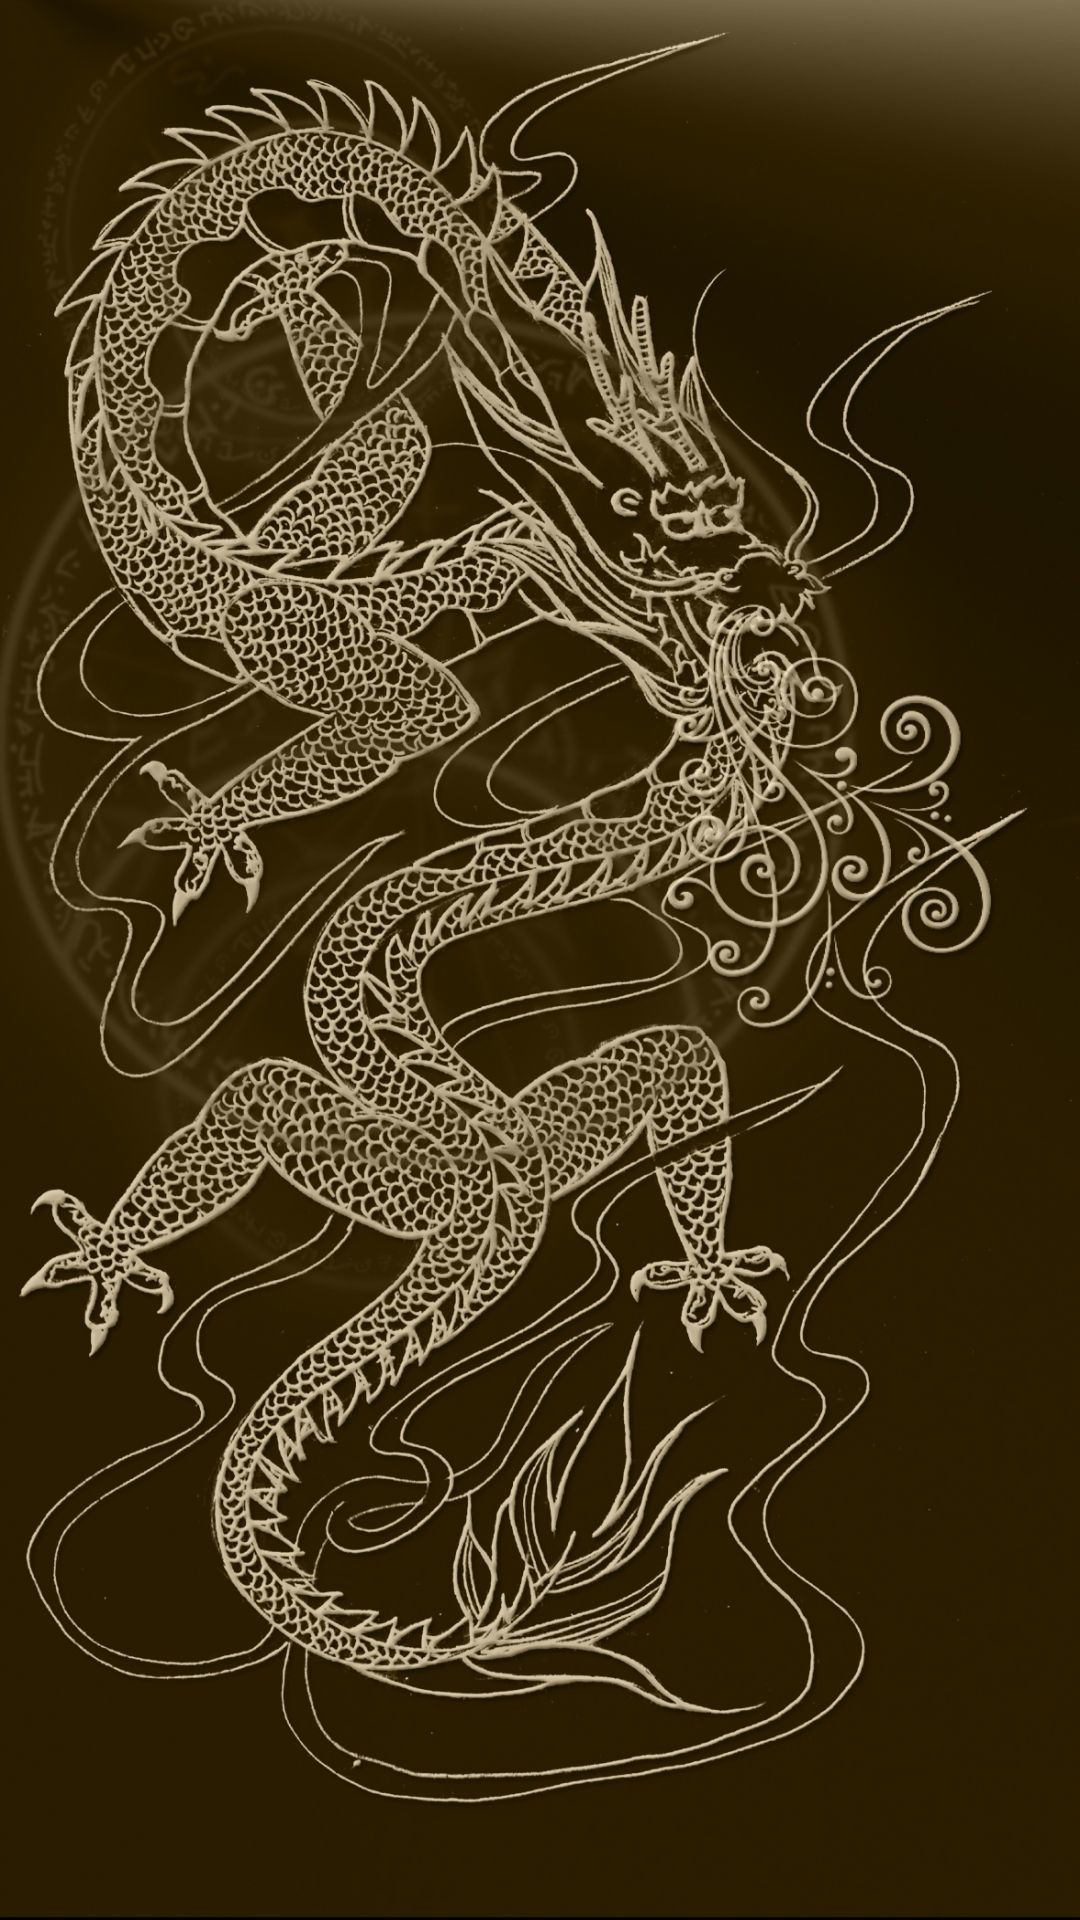 1080x1920 3888x2592 Chinese Dragon Wallpapers